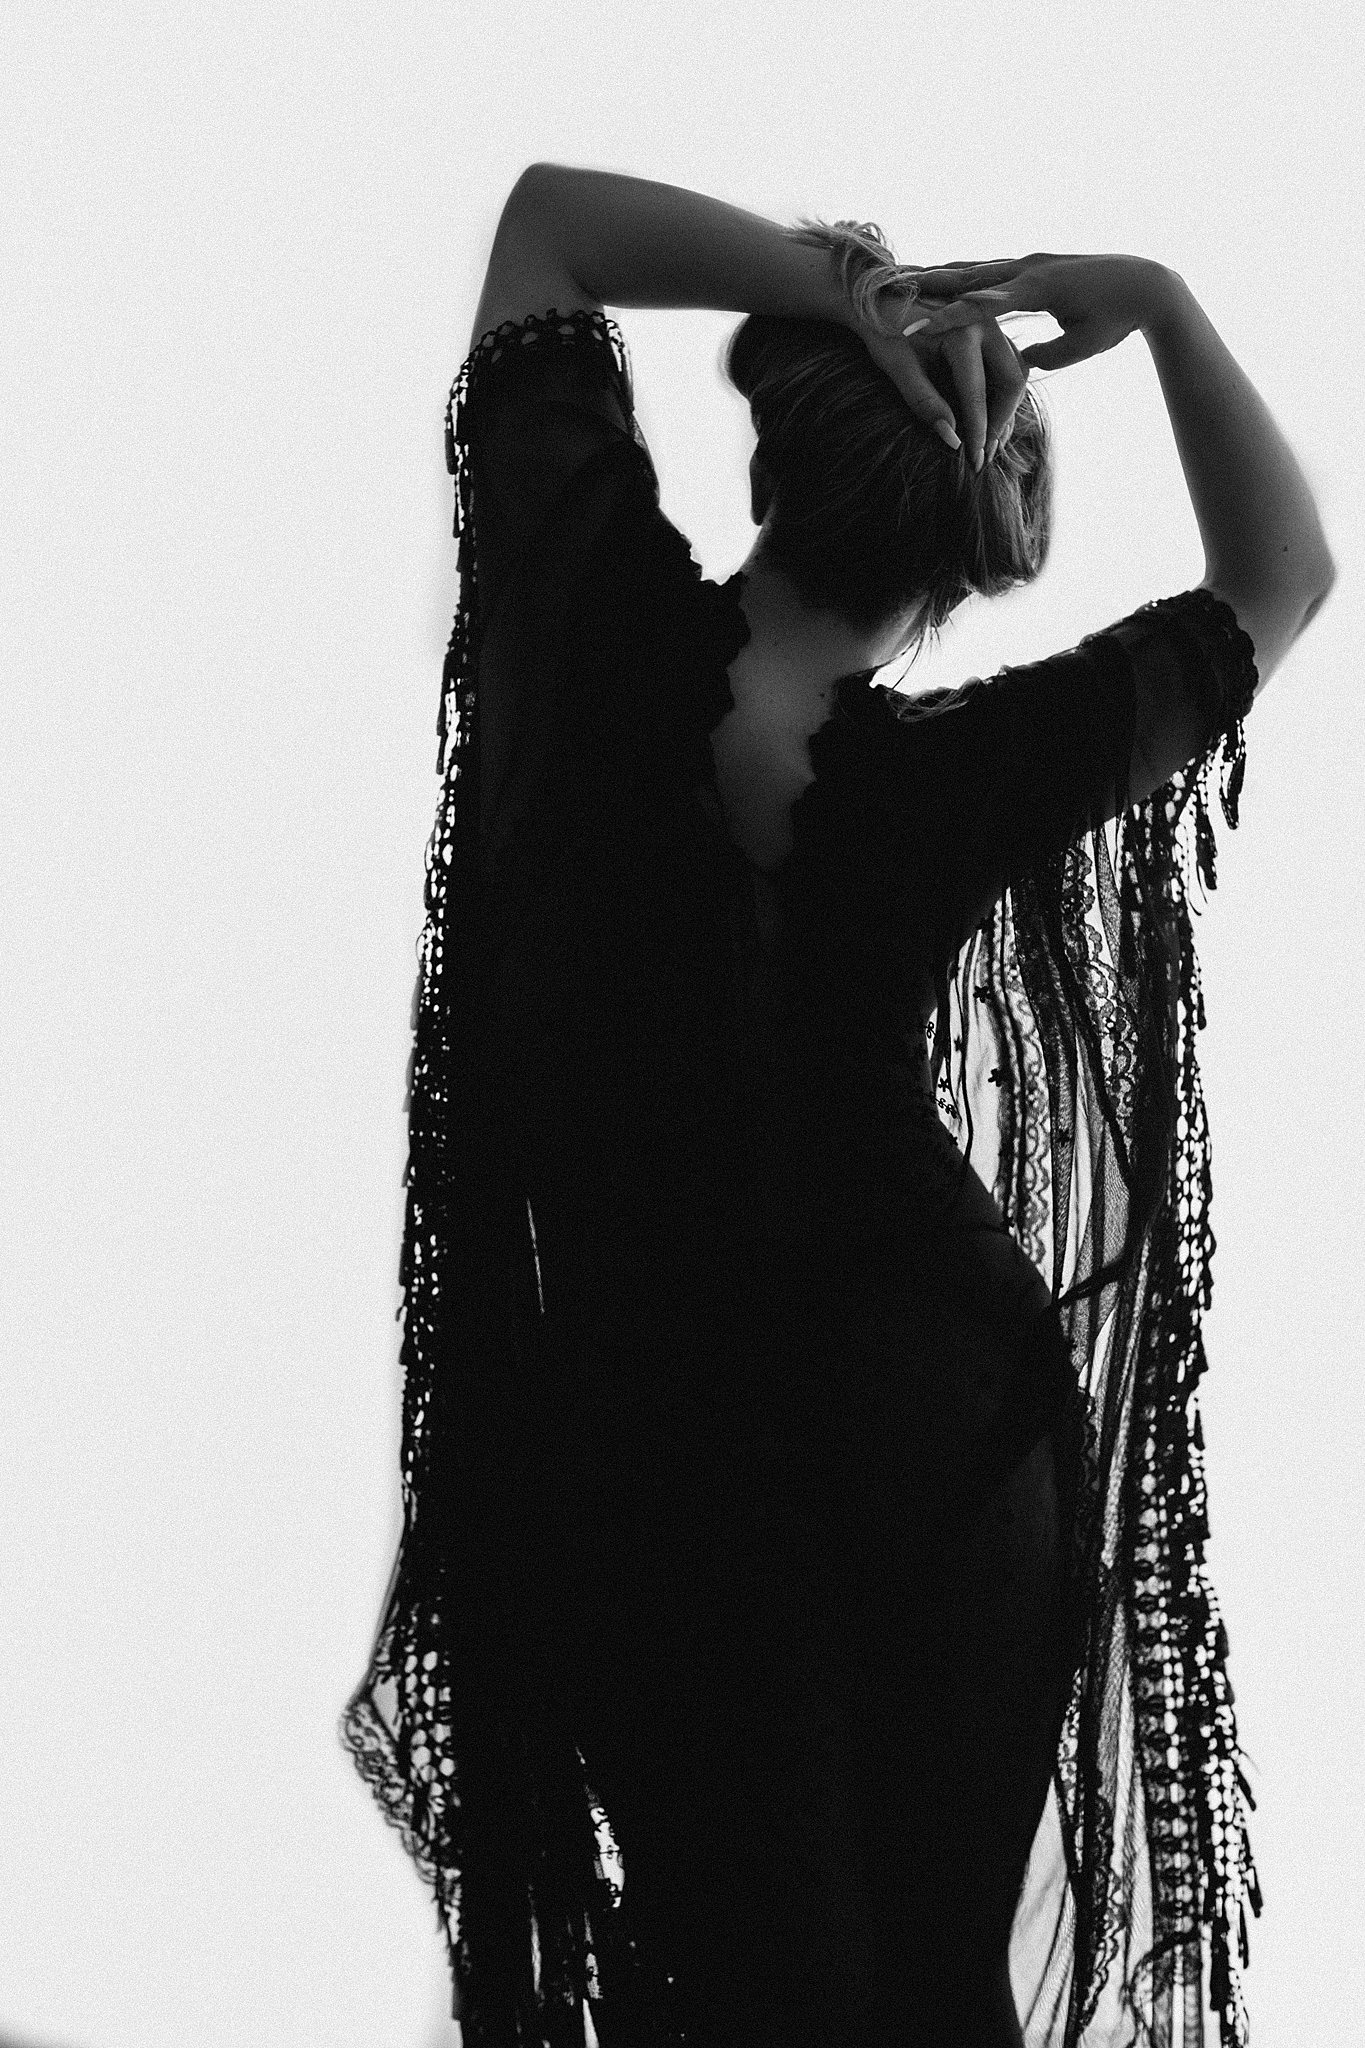 A woman stands in a studio wearing a black shawl with her hands holding her hair up